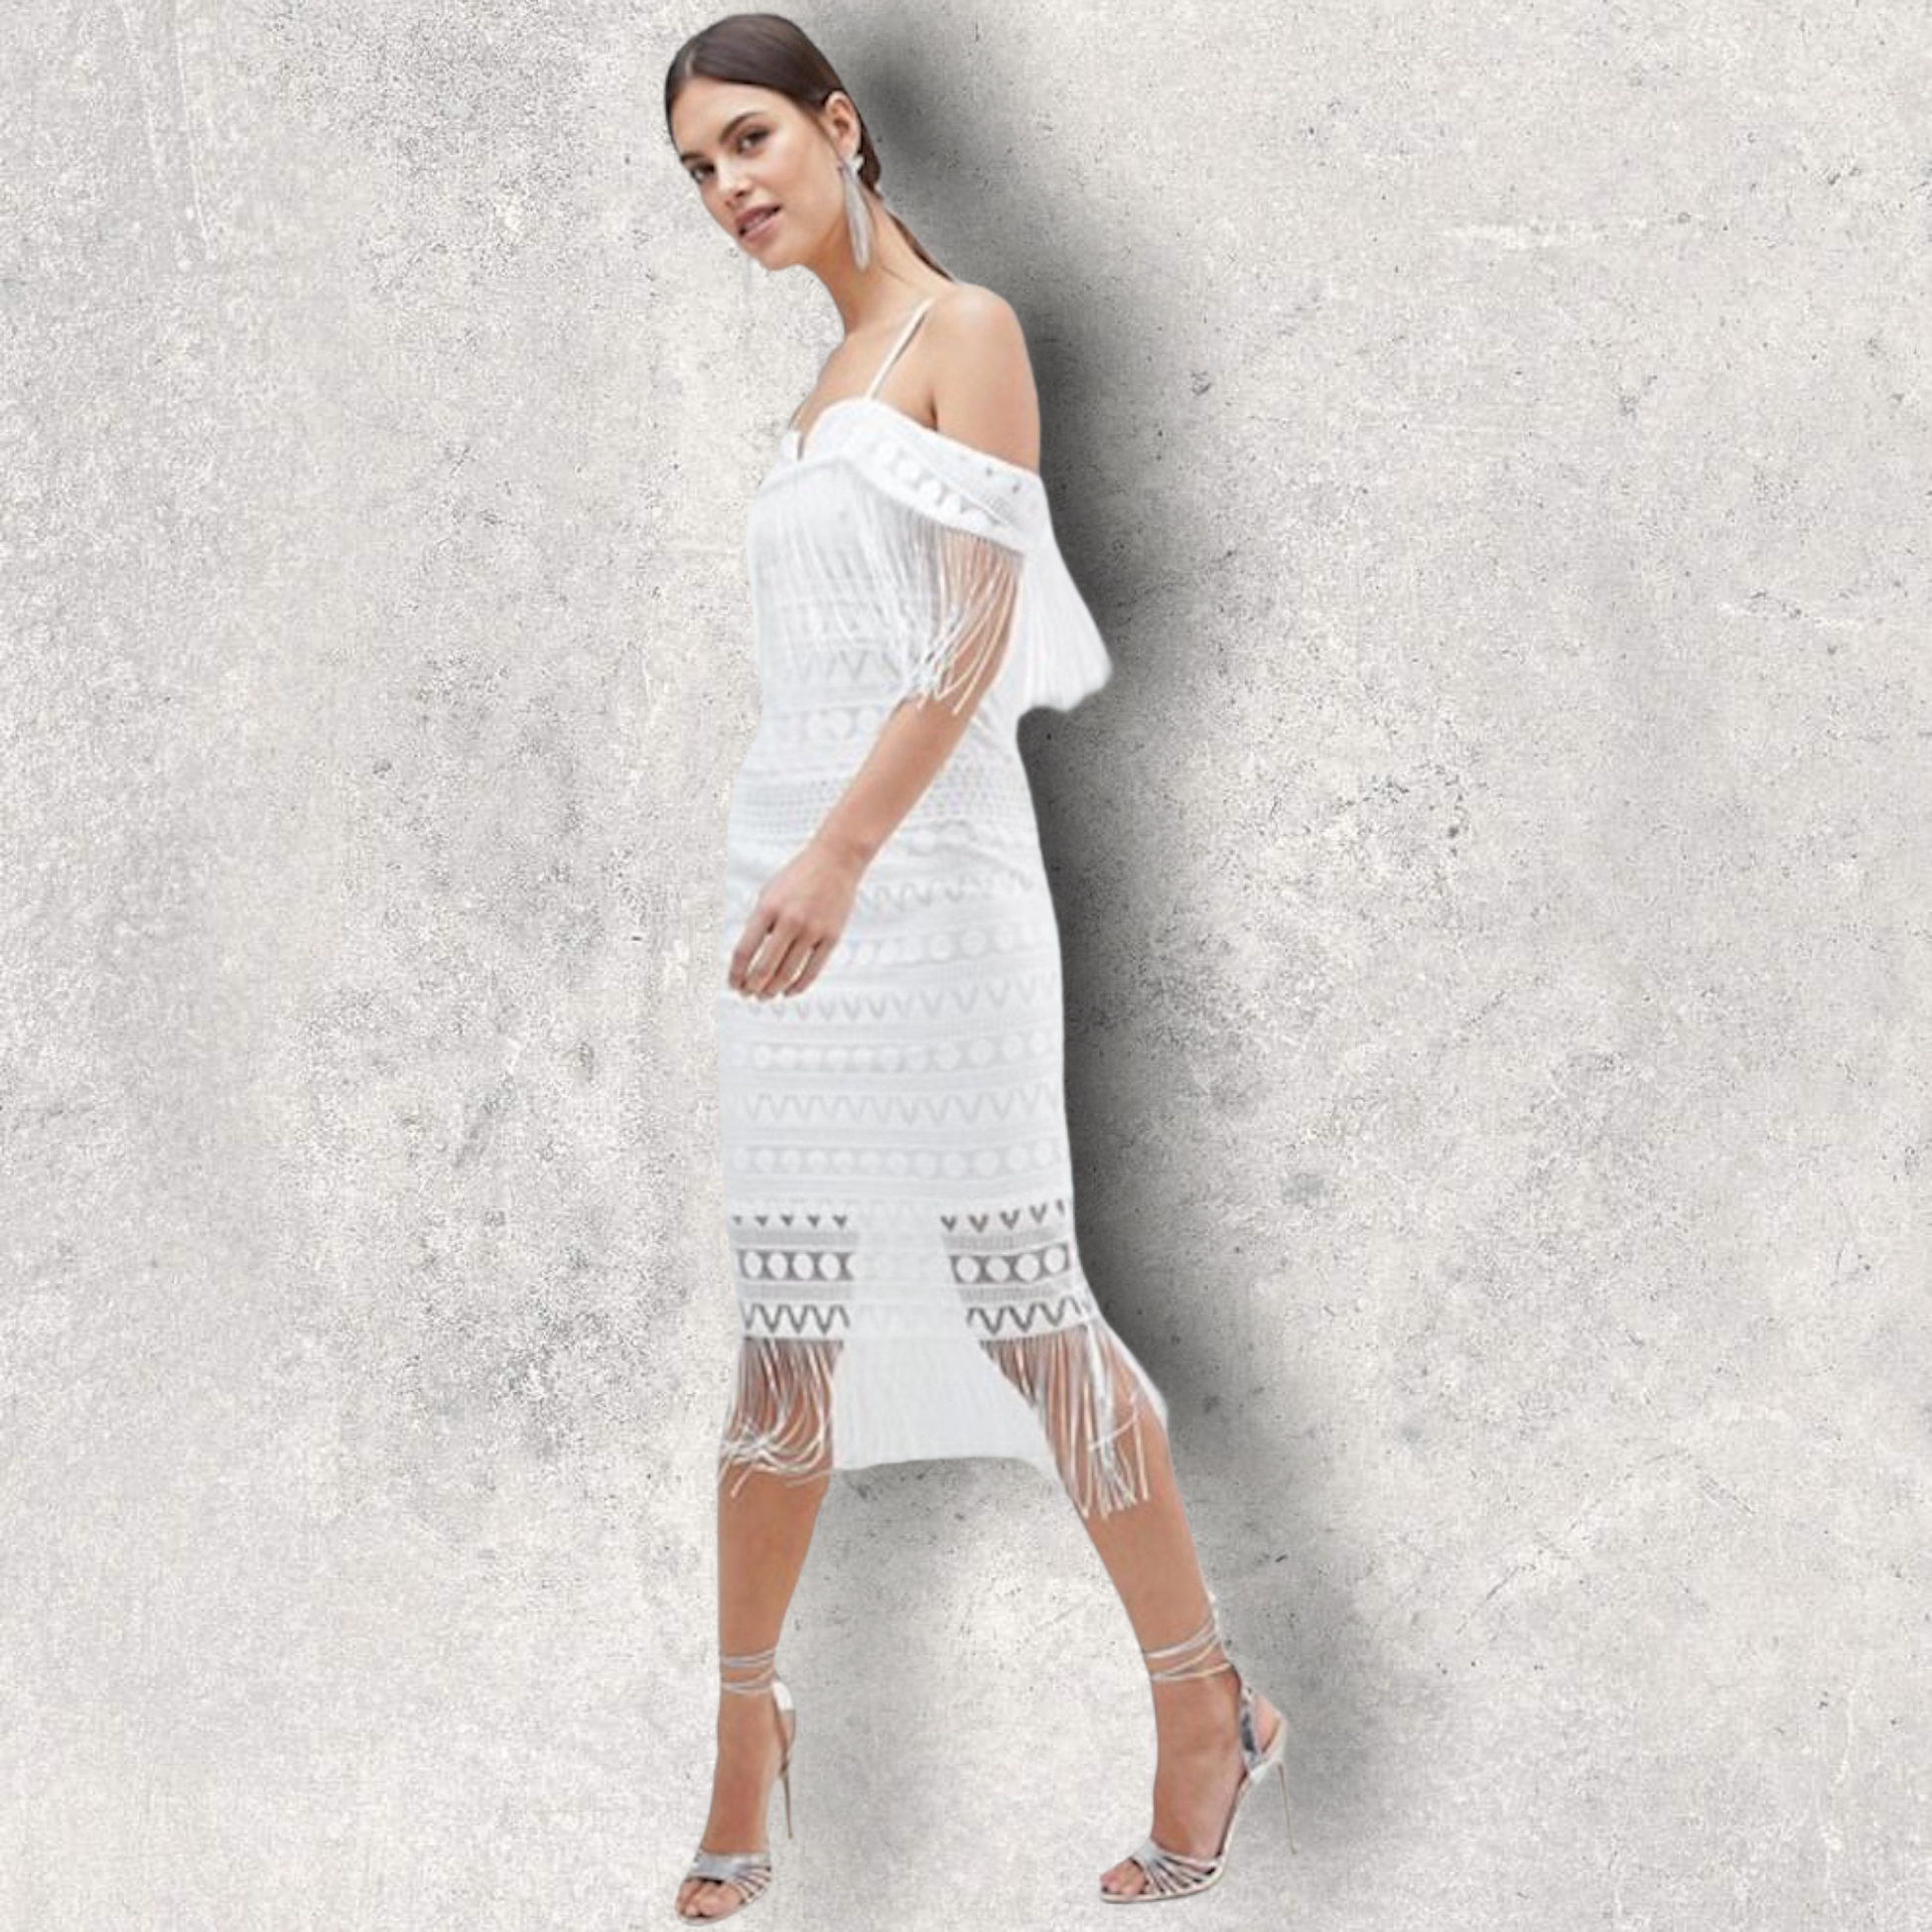 C By Cubic White Off The Shoulder Tassel Summer Dress UK 10 US 6 EU 38 BNWT RRP £89 Timeless Fashions